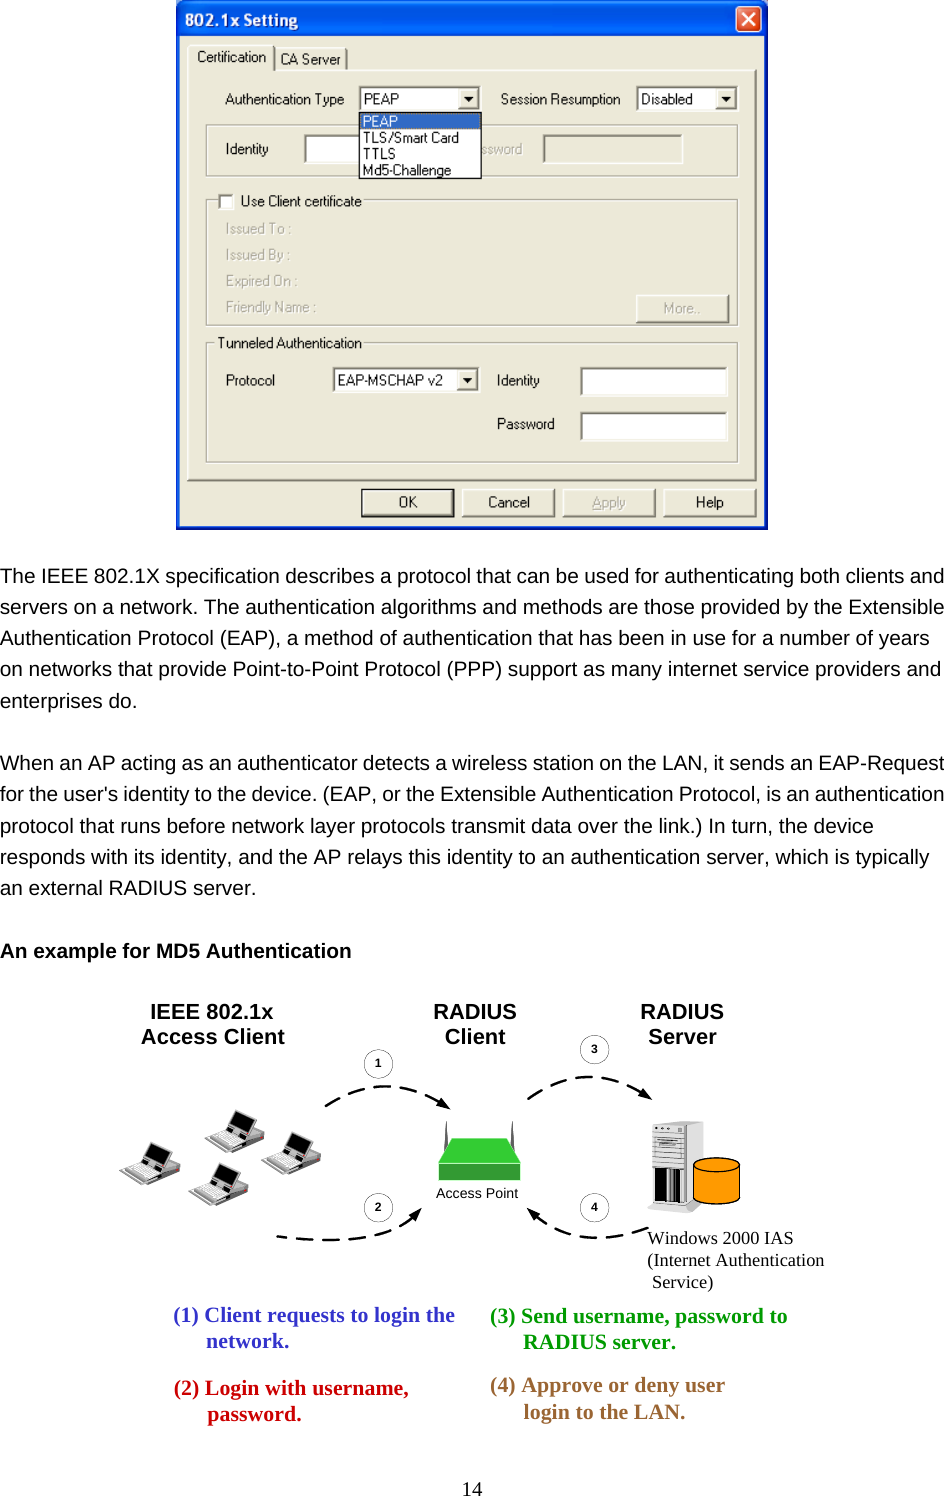  14    The IEEE 802.1X specification describes a protocol that can be used for authenticating both clients and servers on a network. The authentication algorithms and methods are those provided by the Extensible Authentication Protocol (EAP), a method of authentication that has been in use for a number of years on networks that provide Point-to-Point Protocol (PPP) support as many internet service providers and enterprises do.     When an AP acting as an authenticator detects a wireless station on the LAN, it sends an EAP-Request for the user&apos;s identity to the device. (EAP, or the Extensible Authentication Protocol, is an authentication protocol that runs before network layer protocols transmit data over the link.) In turn, the device responds with its identity, and the AP relays this identity to an authentication server, which is typically an external RADIUS server.  An example for MD5 Authentication  RADIUSServerWindows 2000 IAS(Internet AuthenticationService)IEEE 802.1xAccess ClientAccess PointRADIUSClient1234(2) Login with username,password.(1) Client requests to login the      network.(4) Approve or deny userlogin to the LAN.(3) Send username, password to      RADIUS server. 